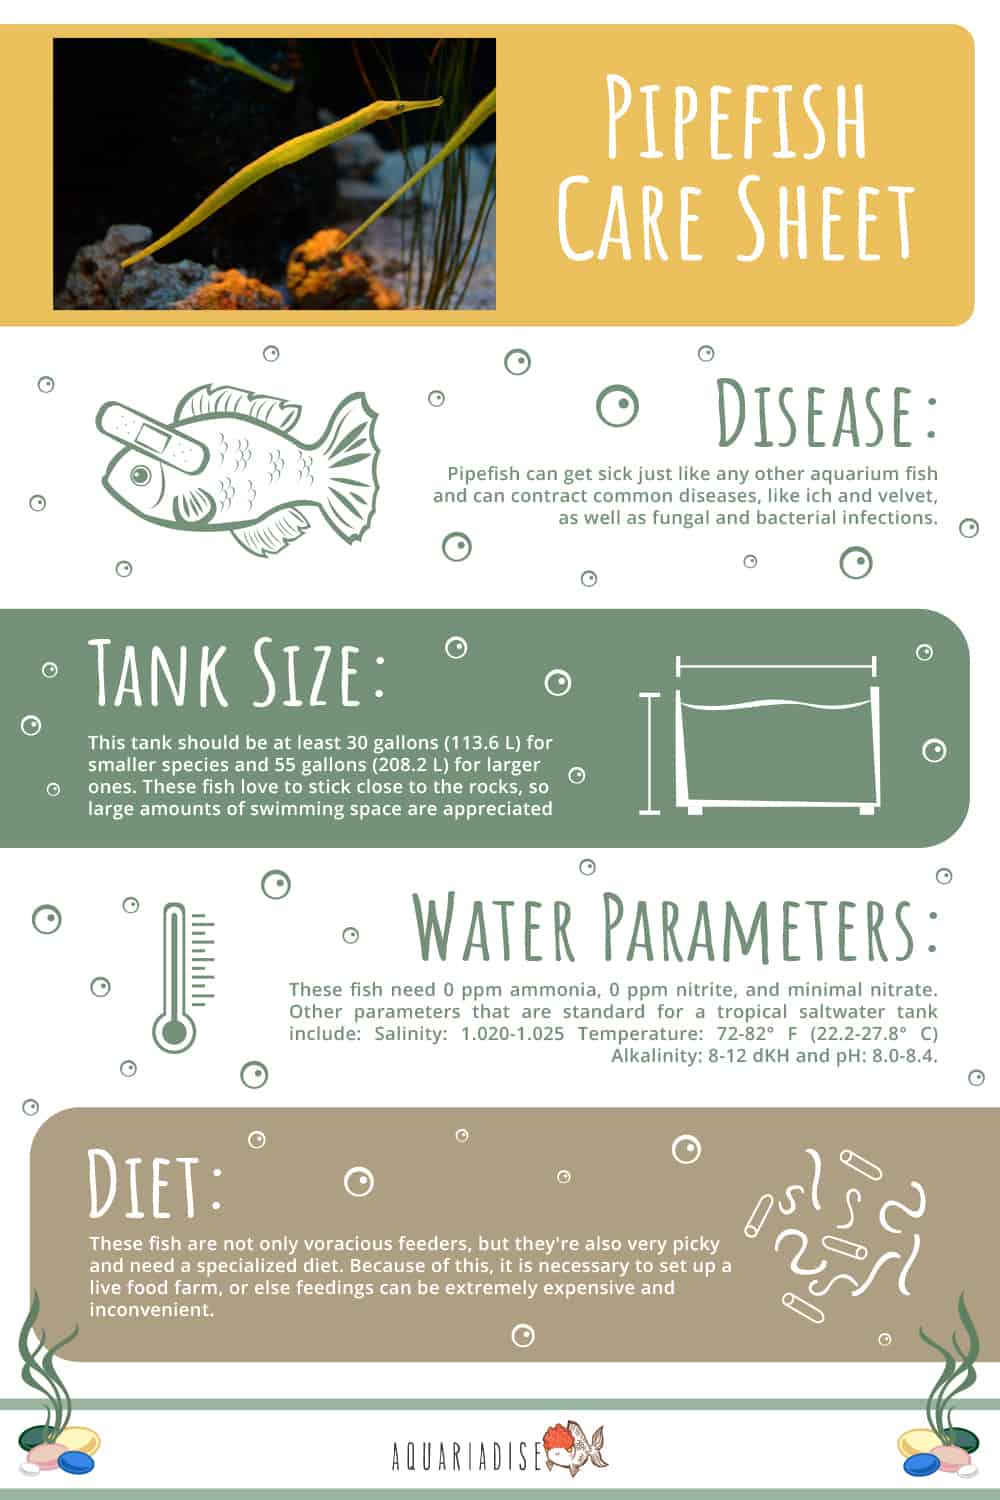 Pipefish Care Sheet Infographic